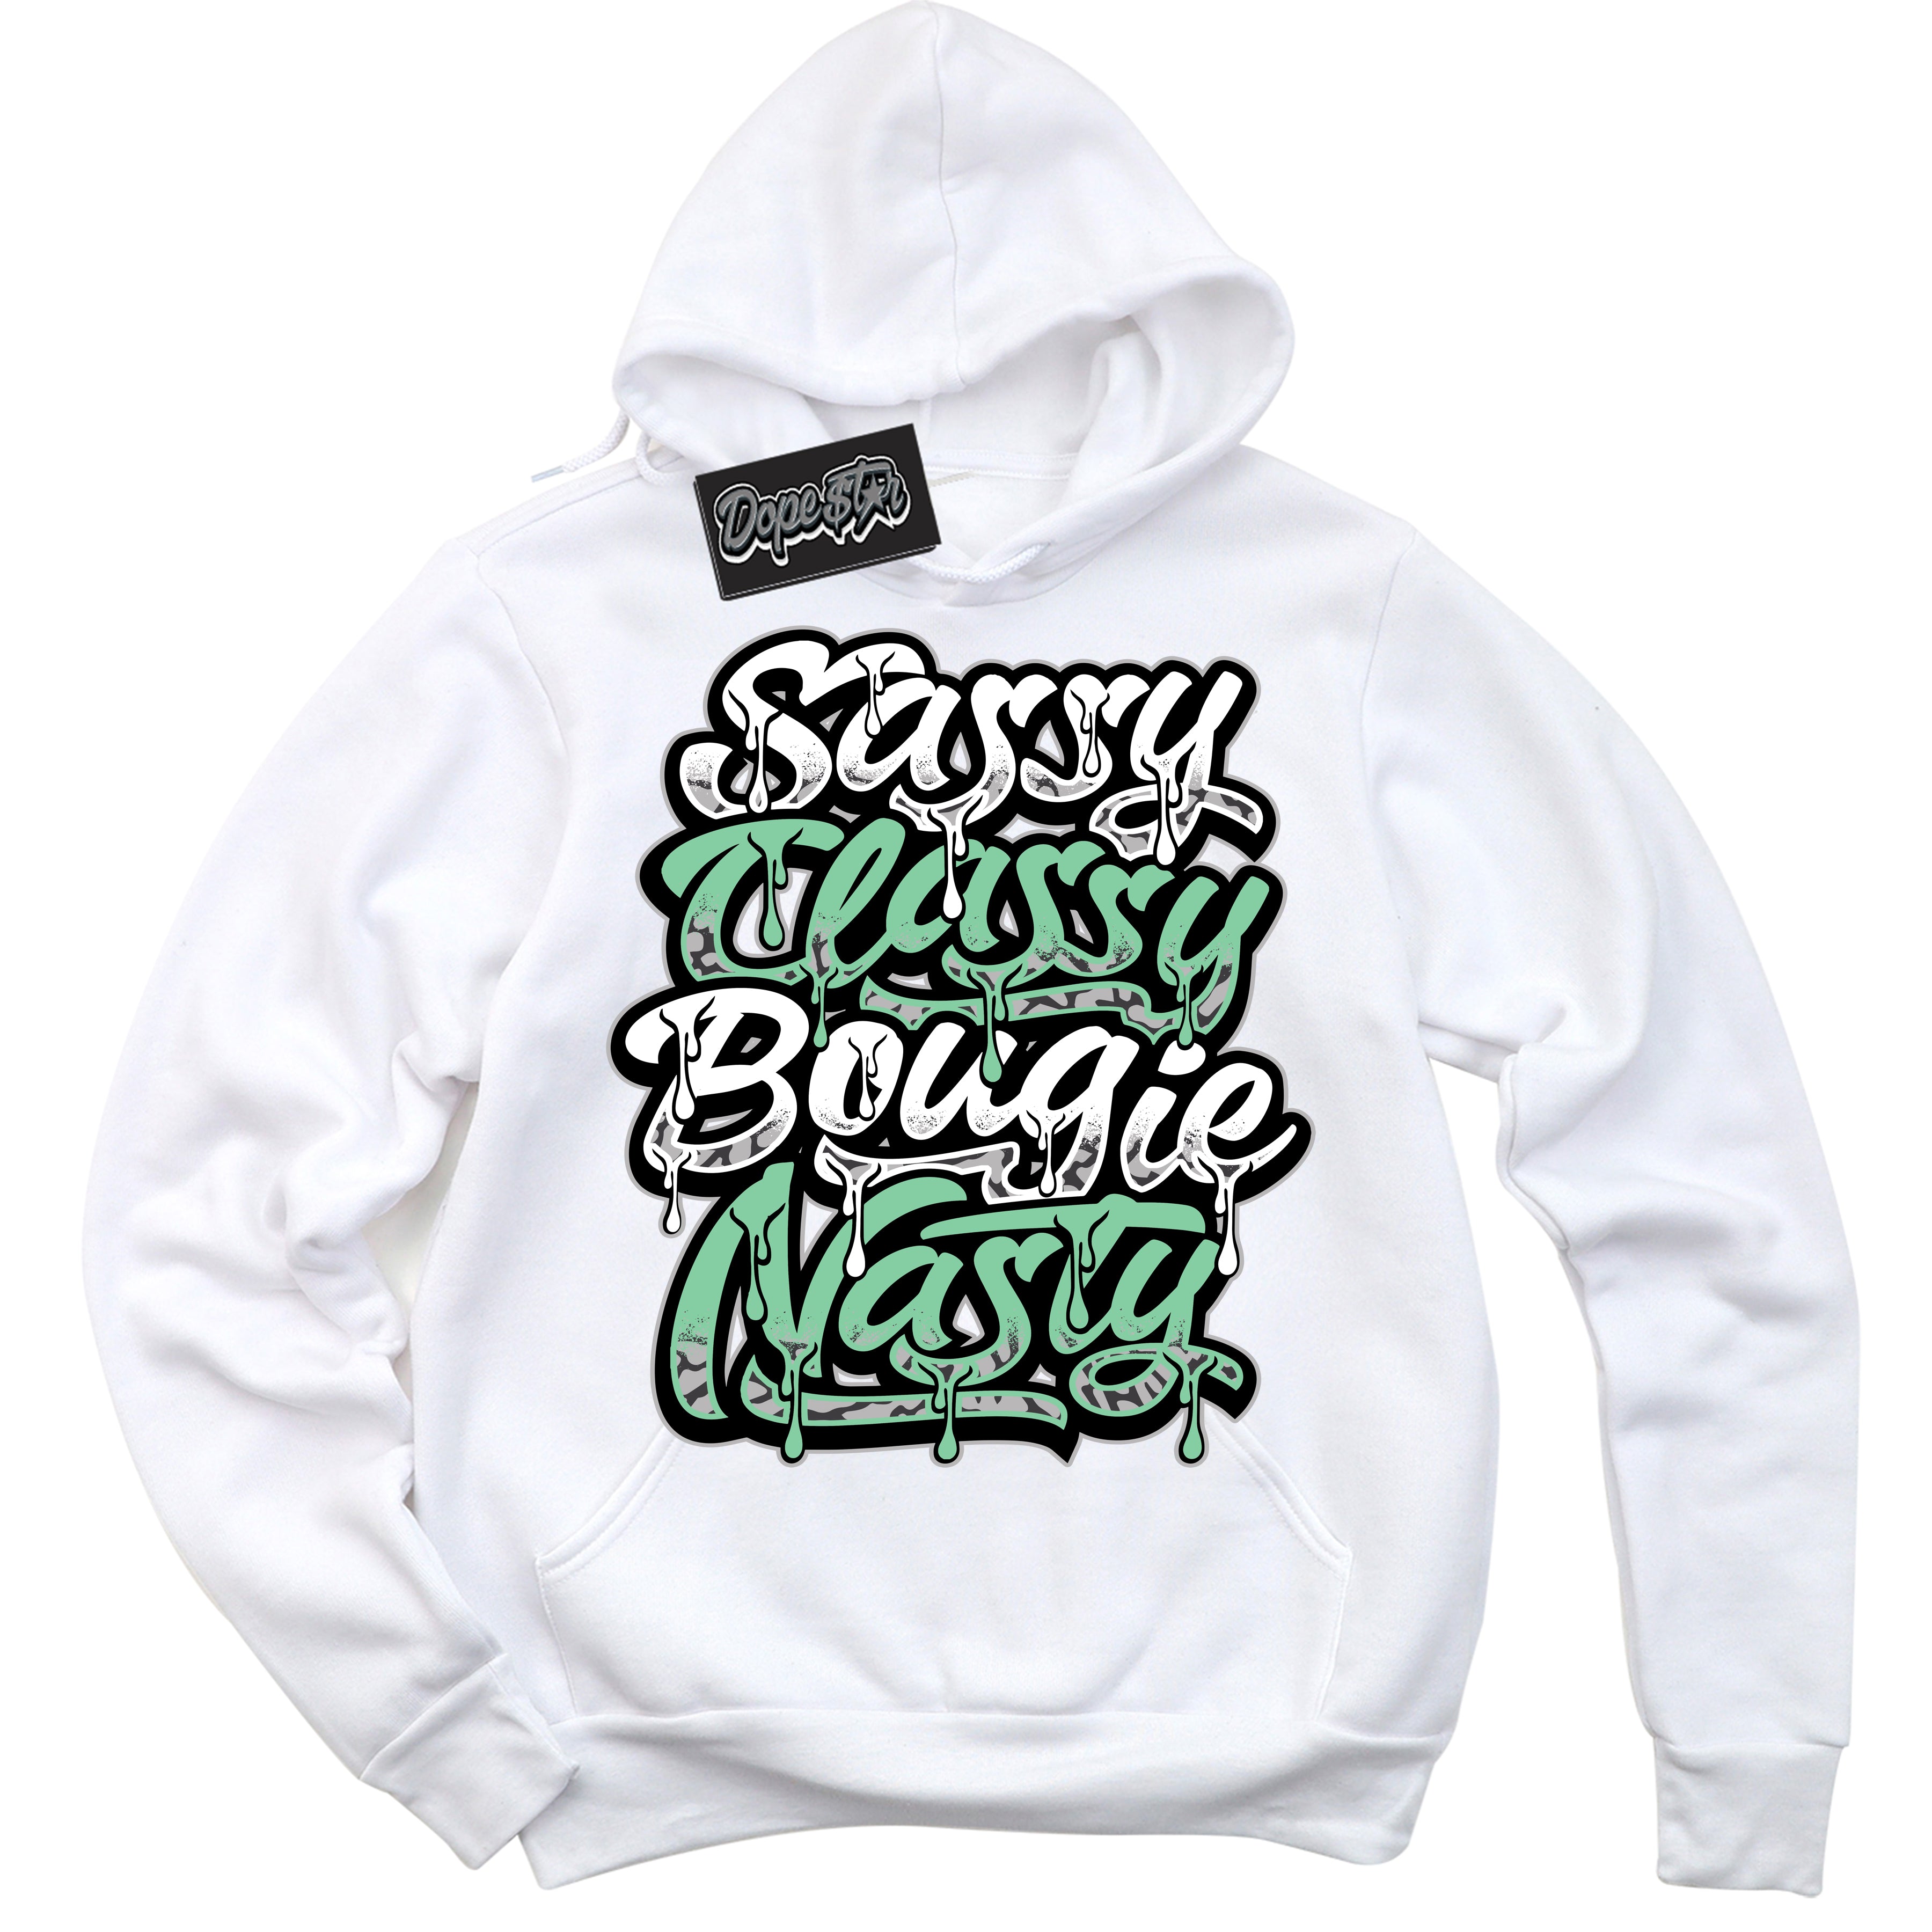 Cool White Graphic DopeStar Hoodie with “ Sassy Classy “ print, that perfectly matches Green Glow 3s sneakers